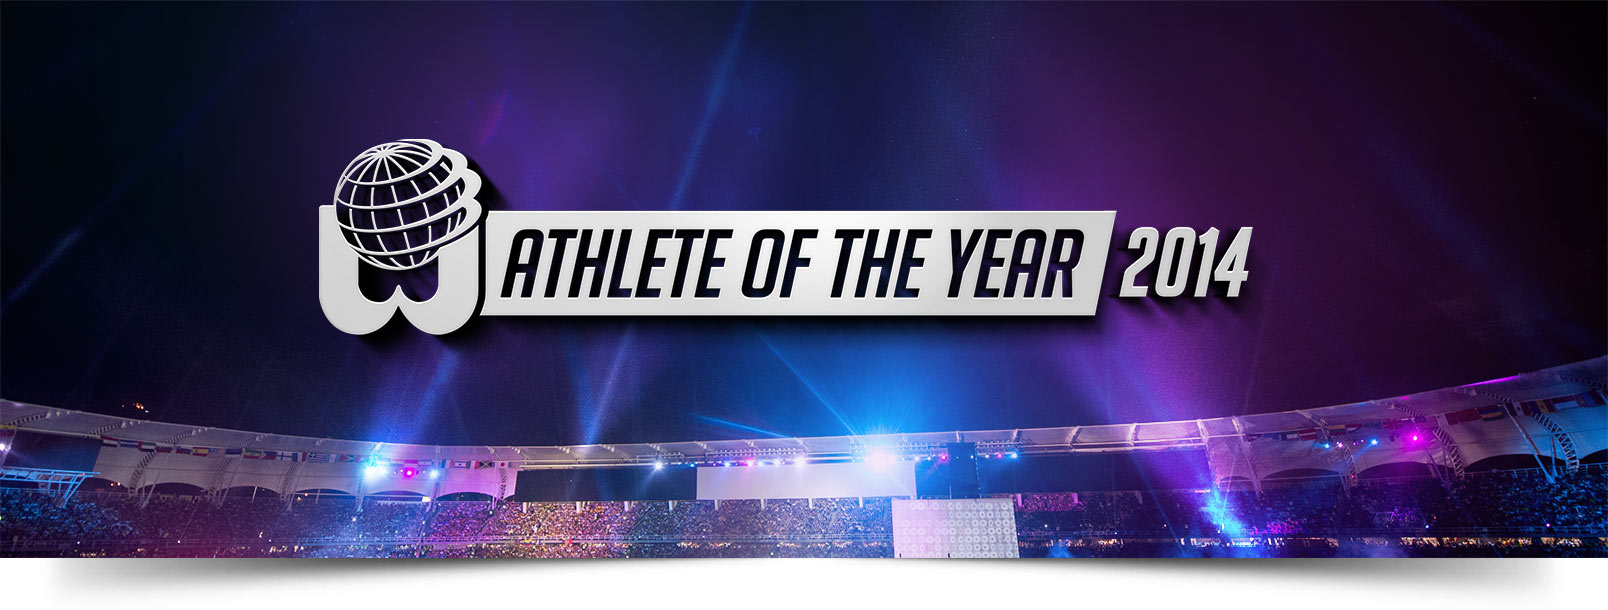 Athlete of the year 2014 vote banner